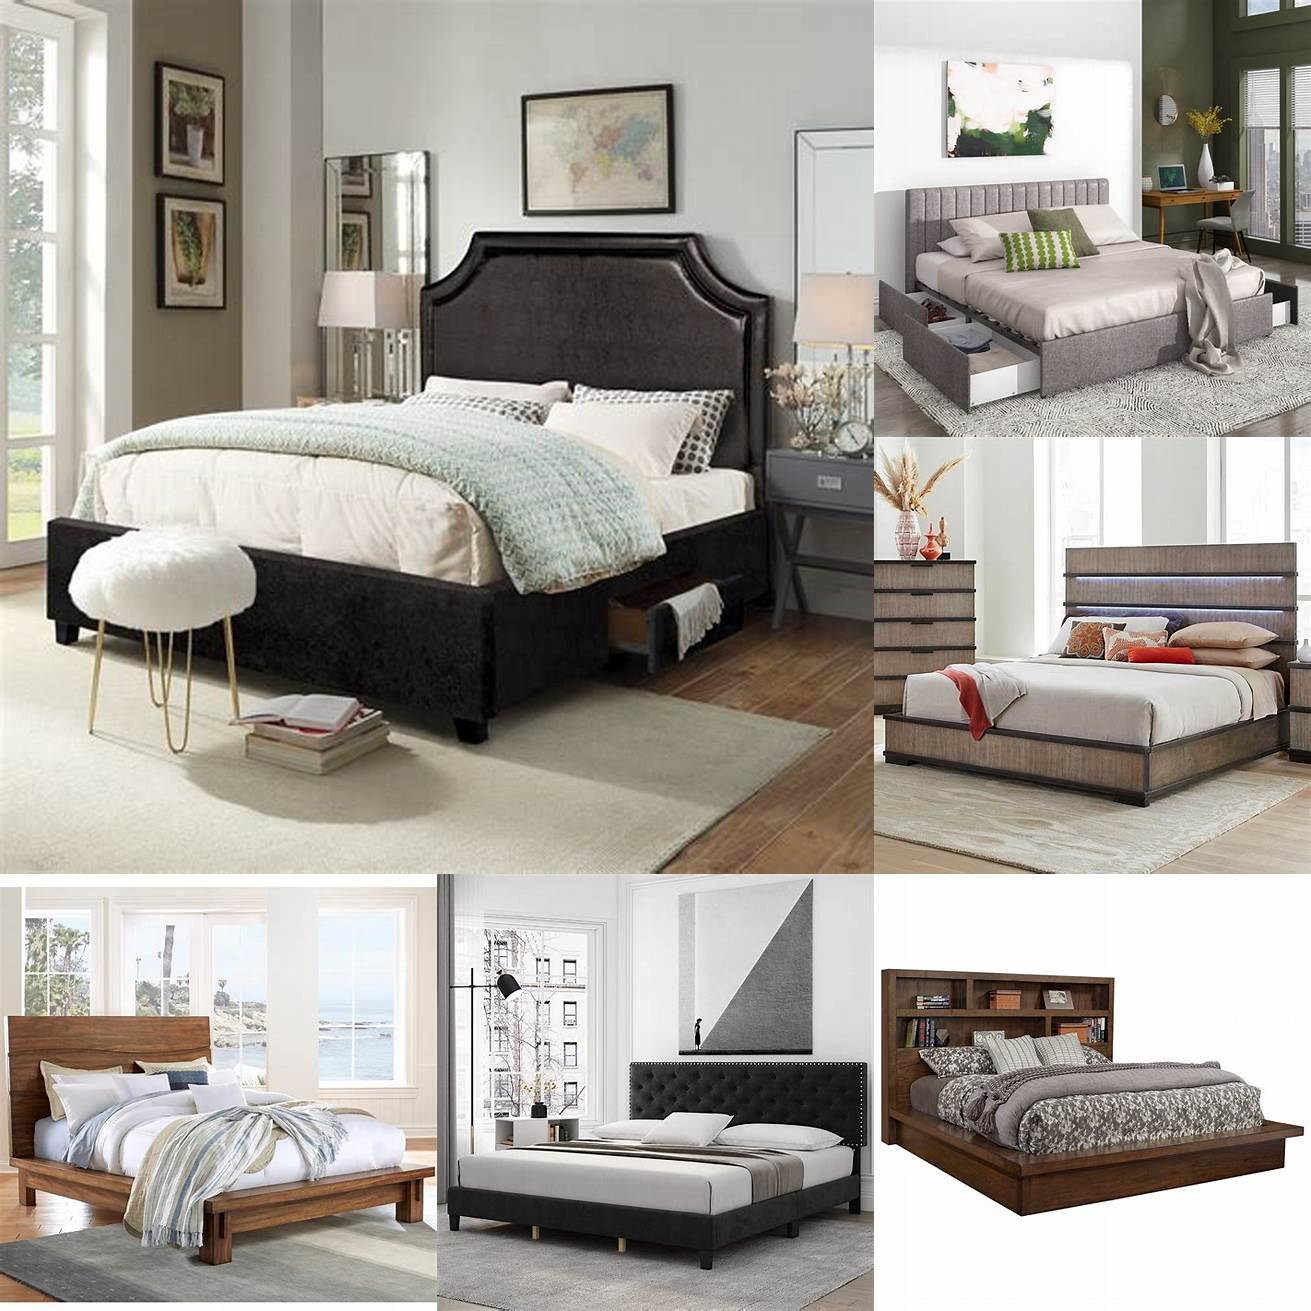 King platform bed with headboard